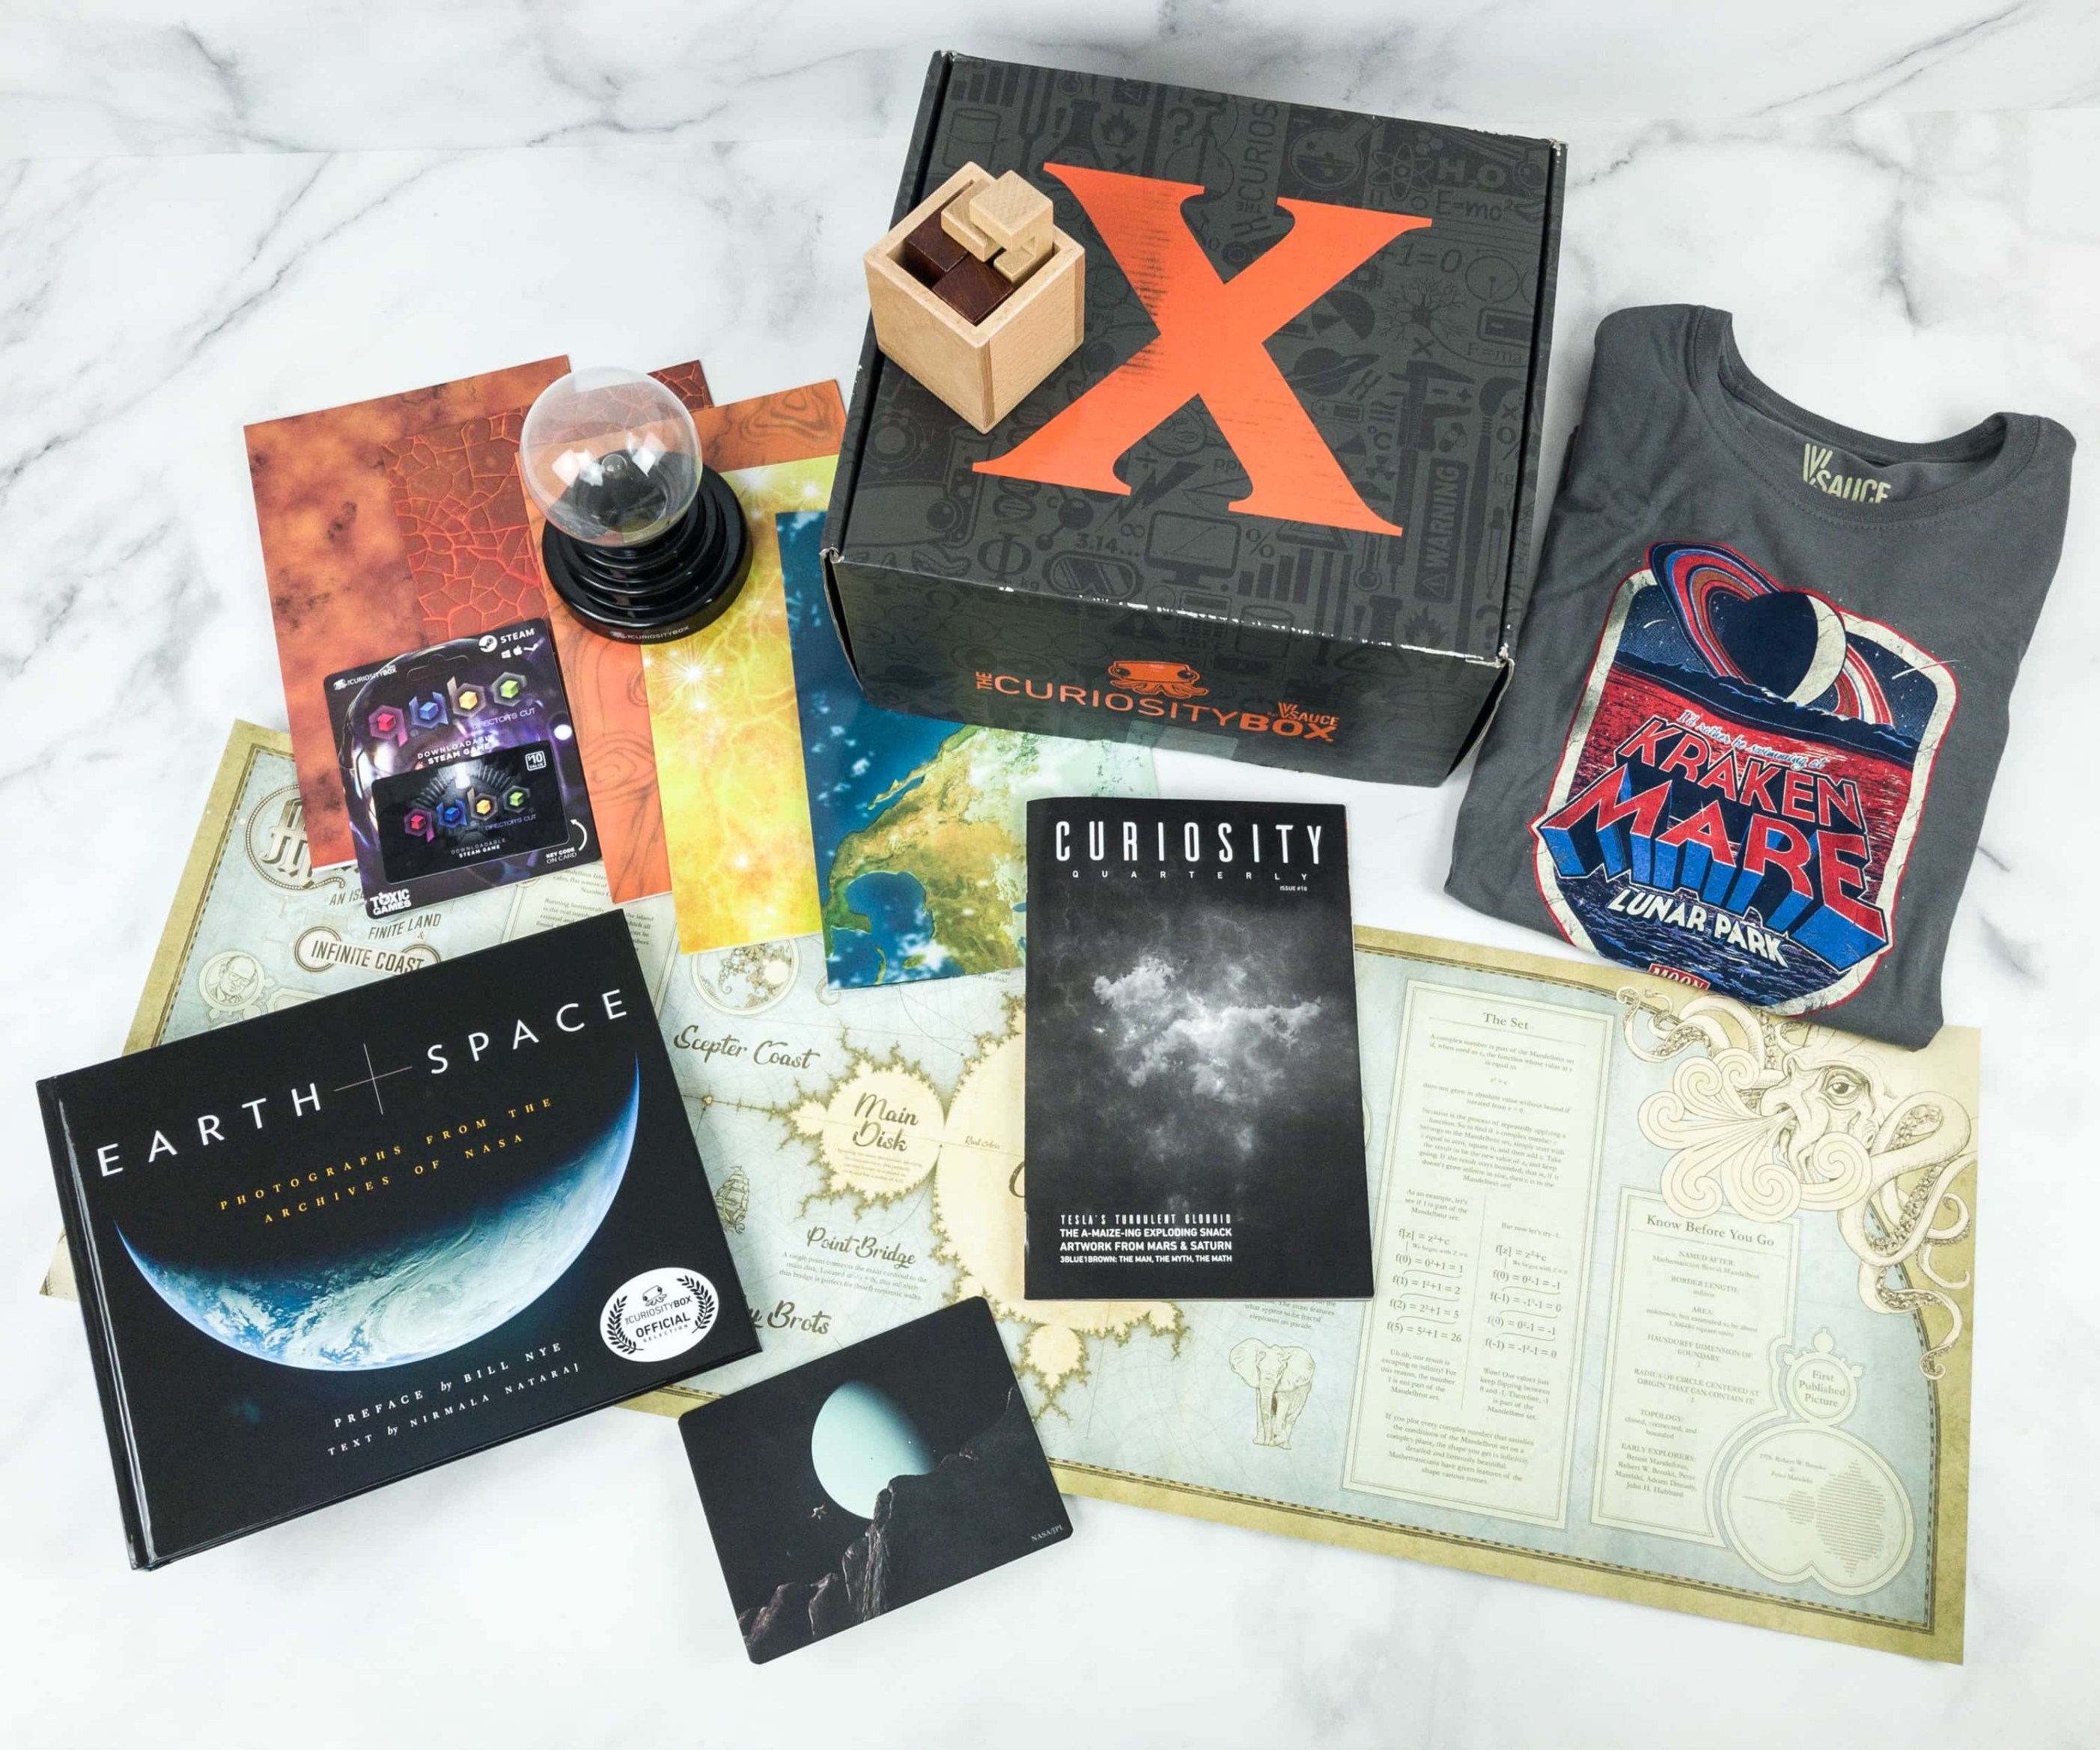 The Curiosity Box Reviews Get All The Details At Hello Subscription!